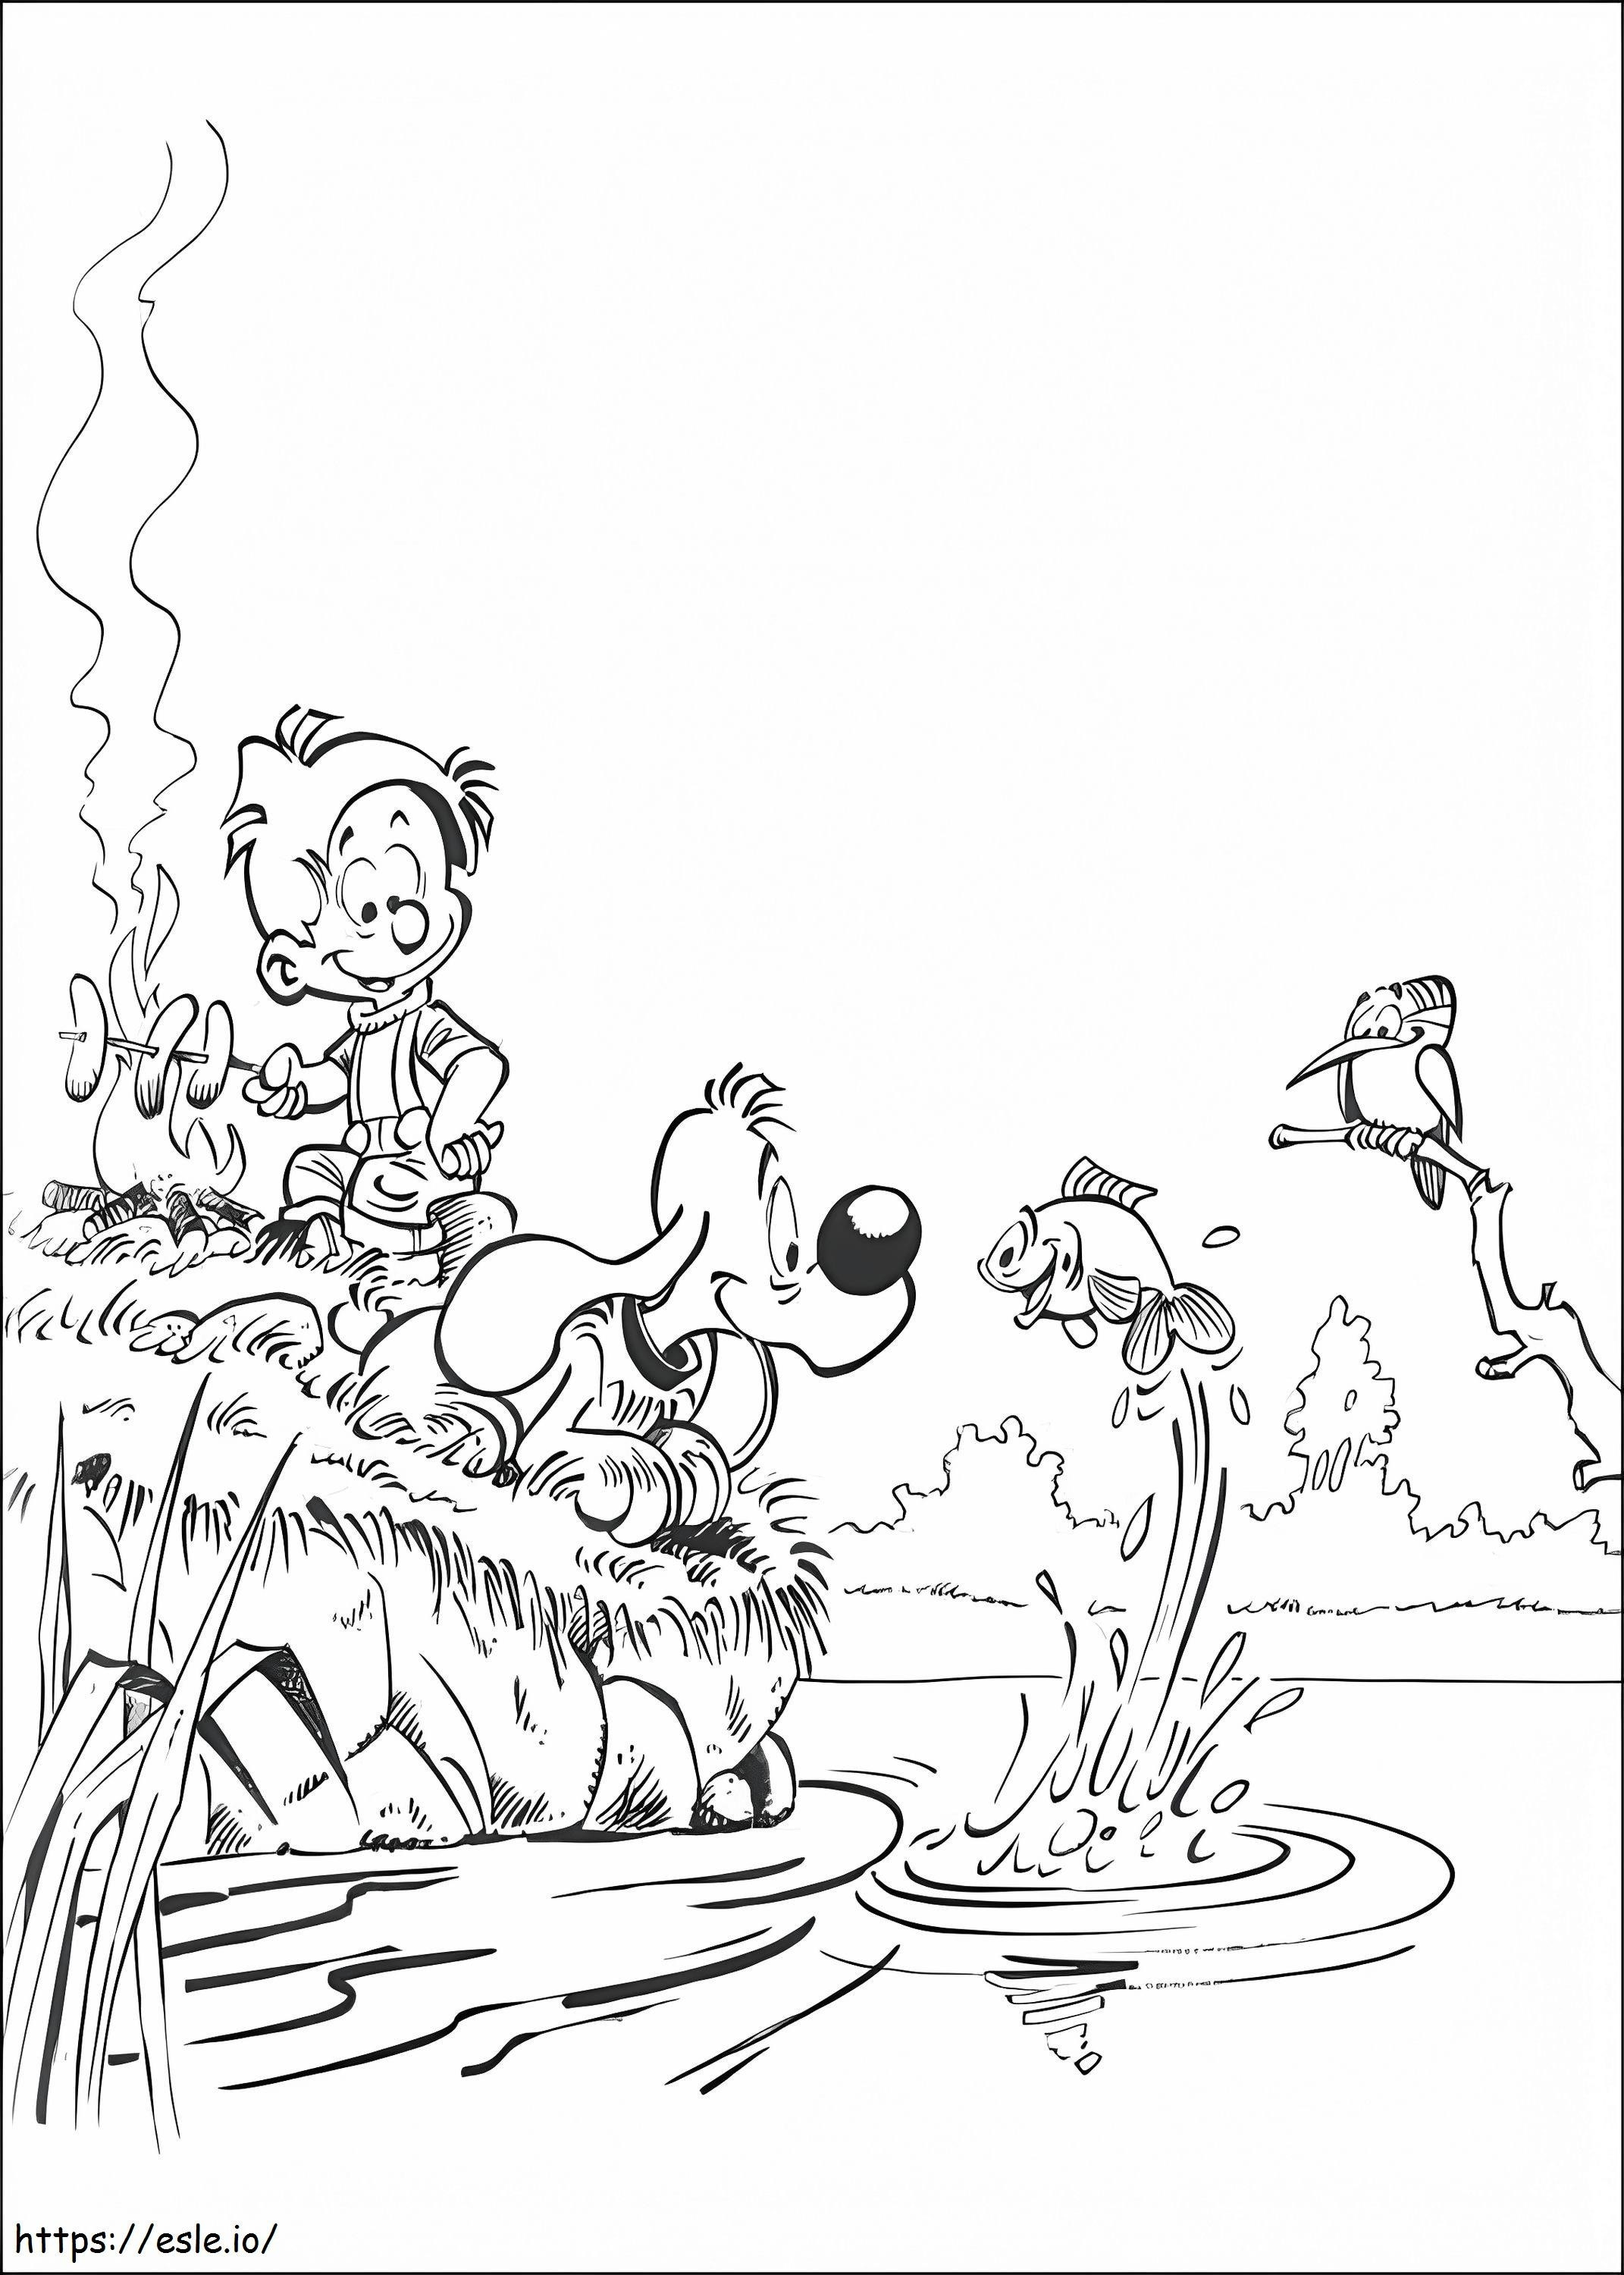 Billy And Buddy 9 coloring page